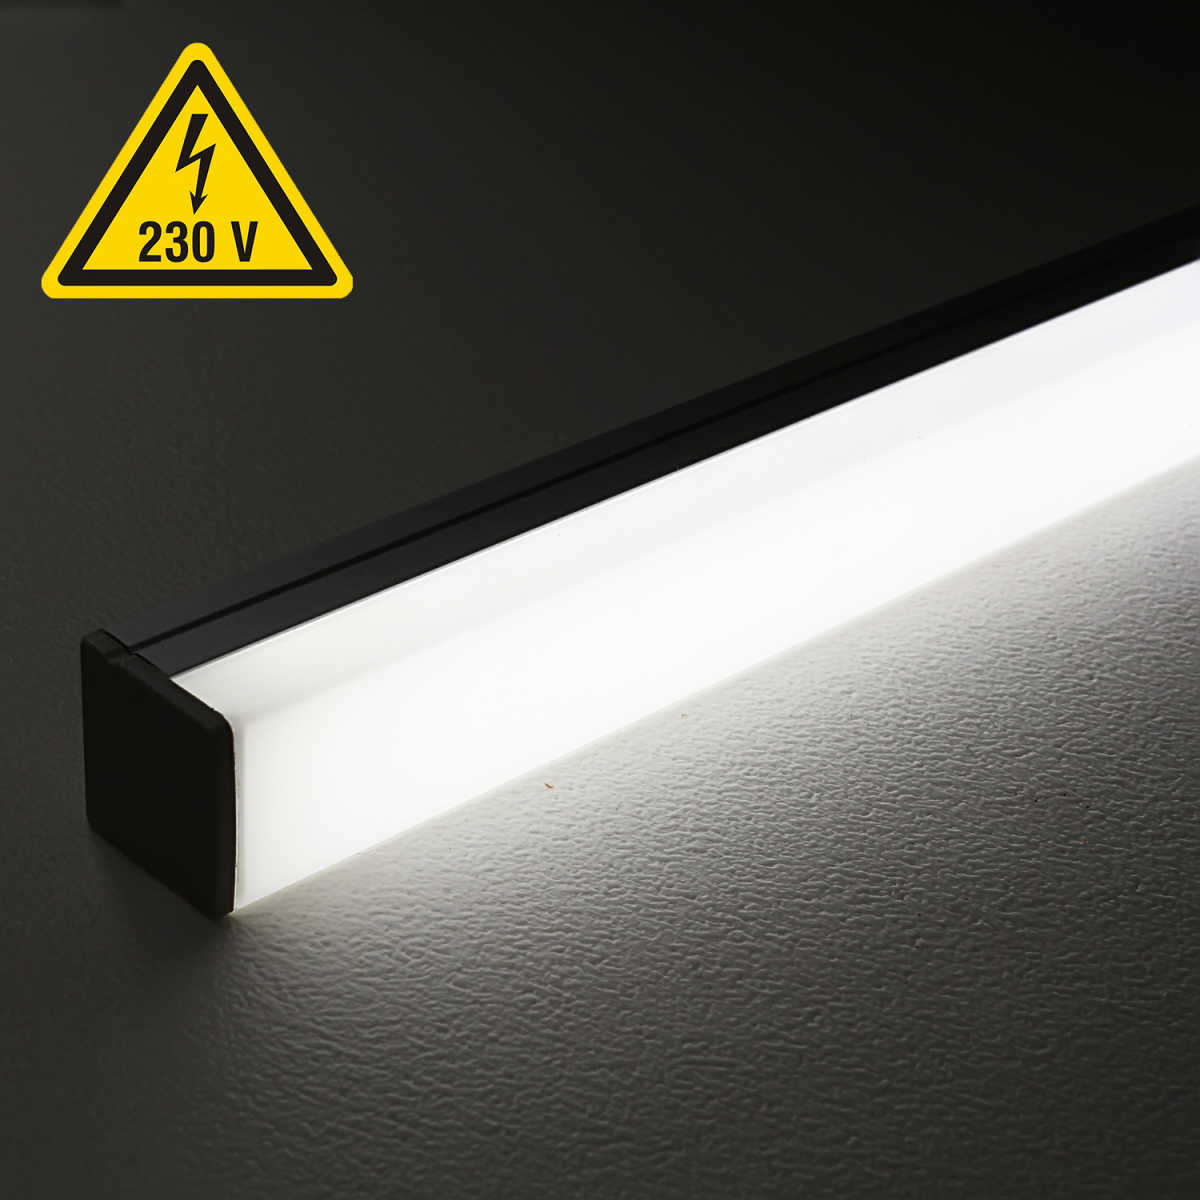 https://led-leisten.com/media/image/product/465741/md/230v-led-lichtleiste-edgy-line-dimmbar-ip65-tageslichtweiss-6300k-diffus-120x-2835-leds-163w-1840lm-m-120-cri85.jpg